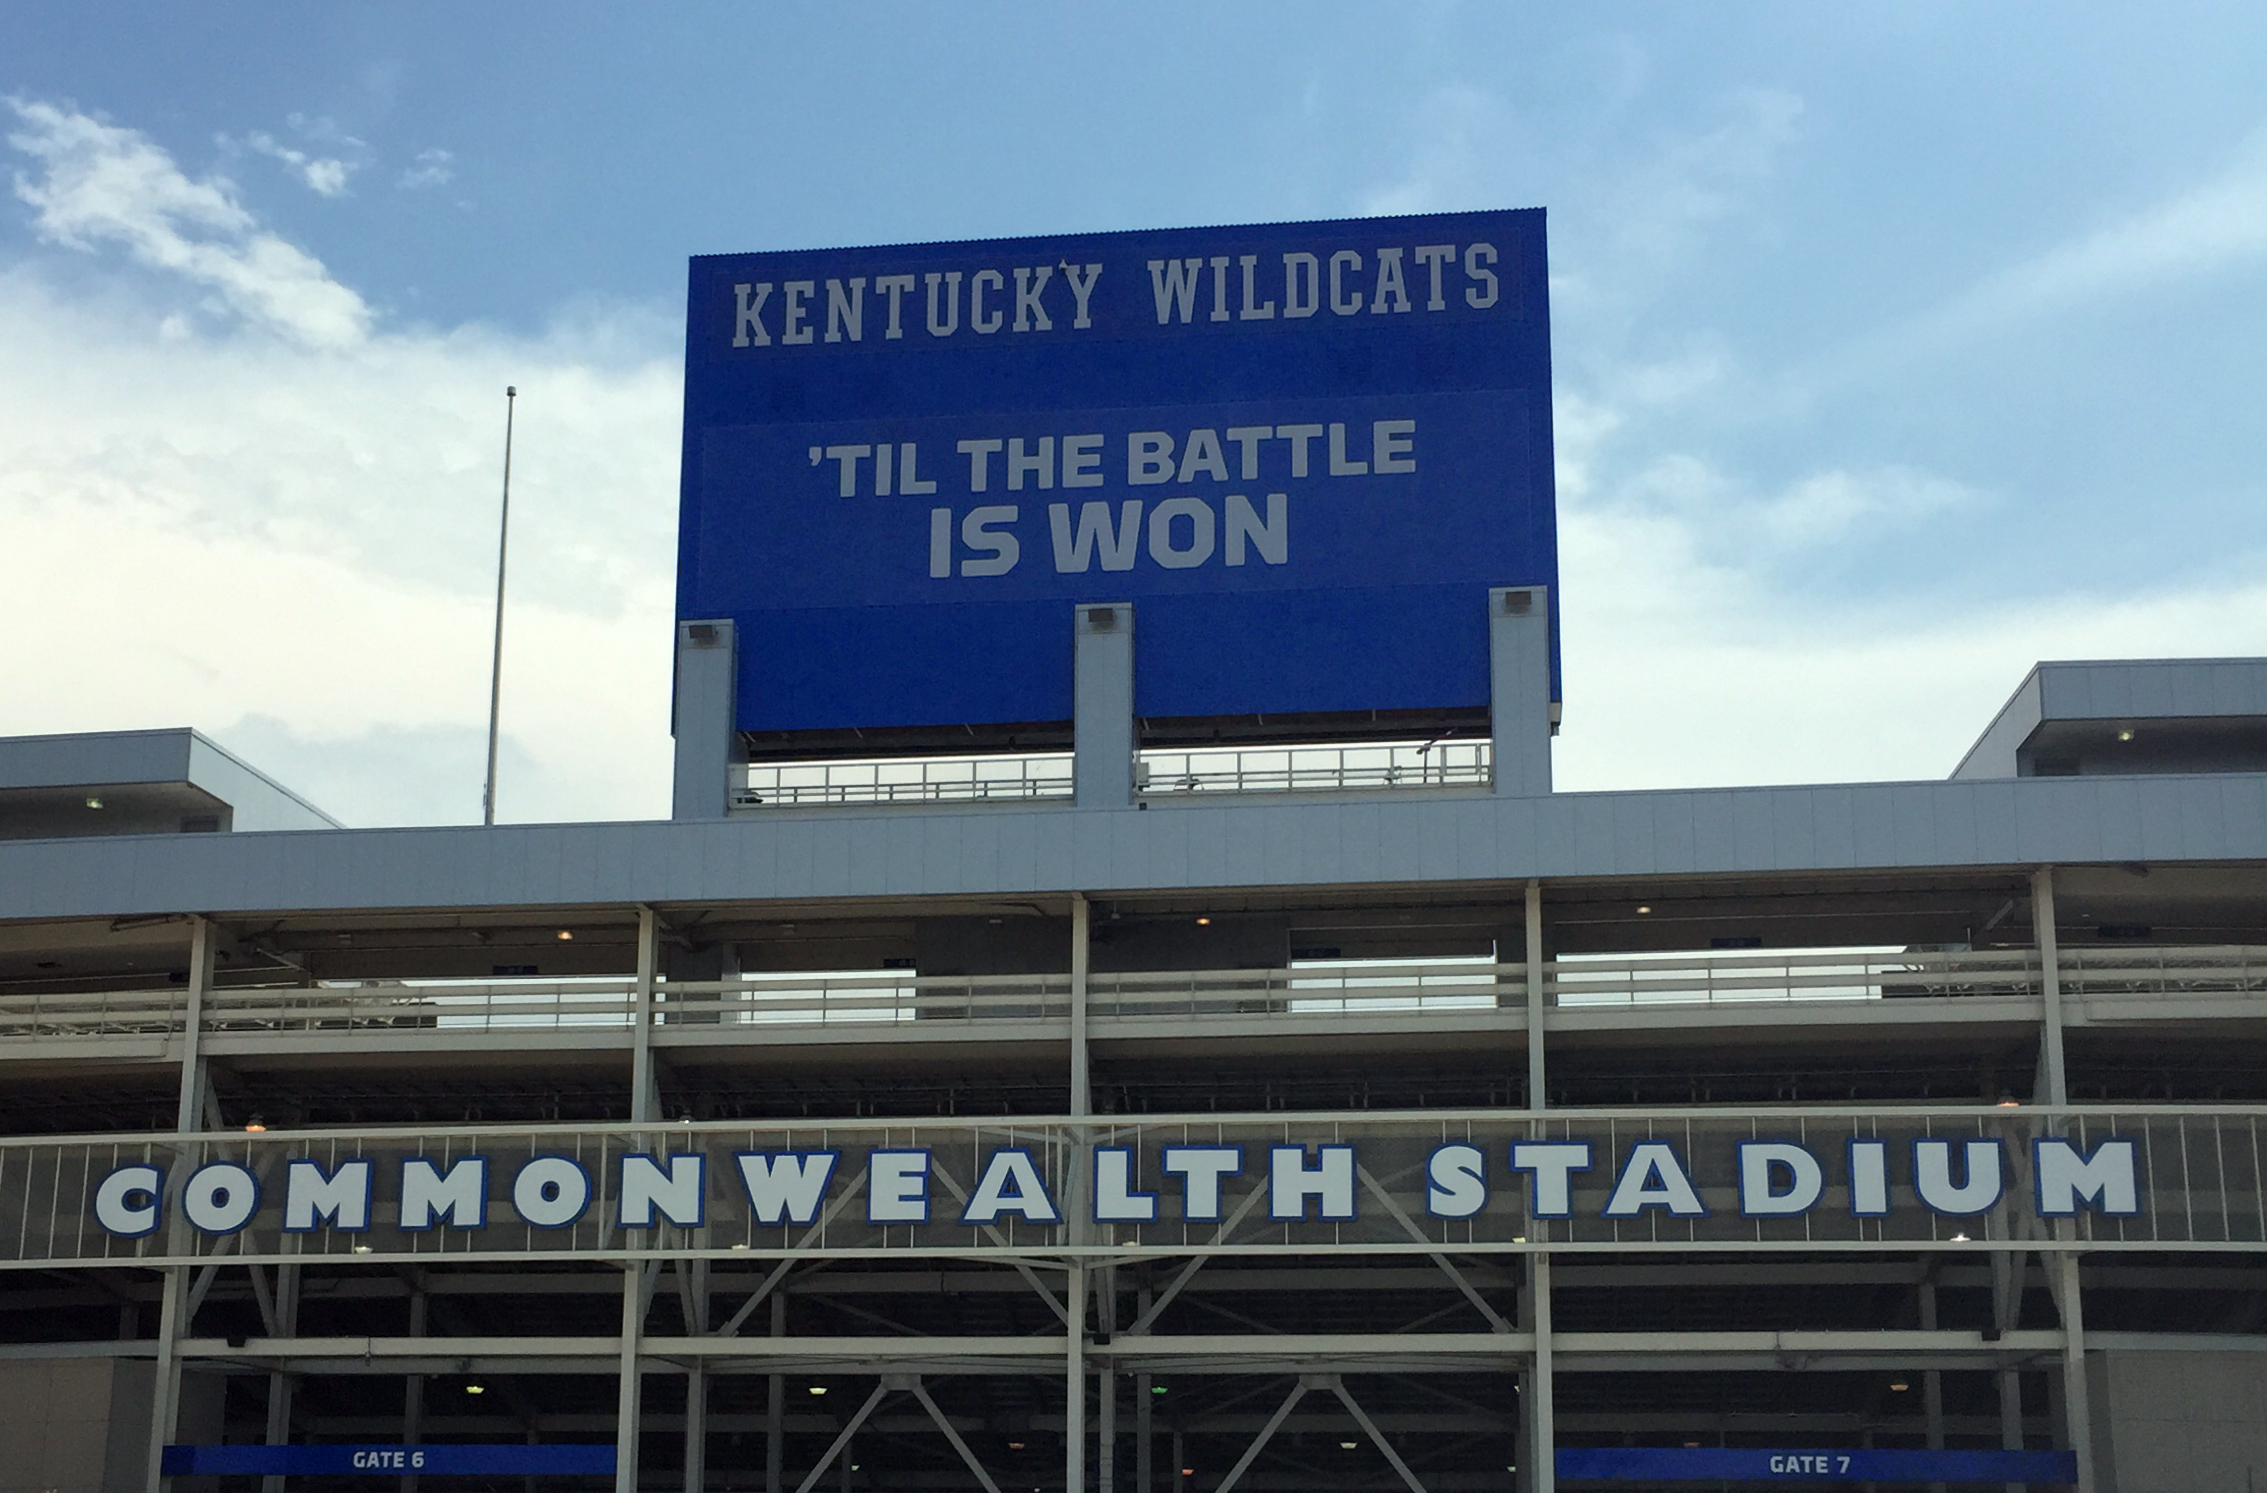 Vote on the back of The New CWS video board